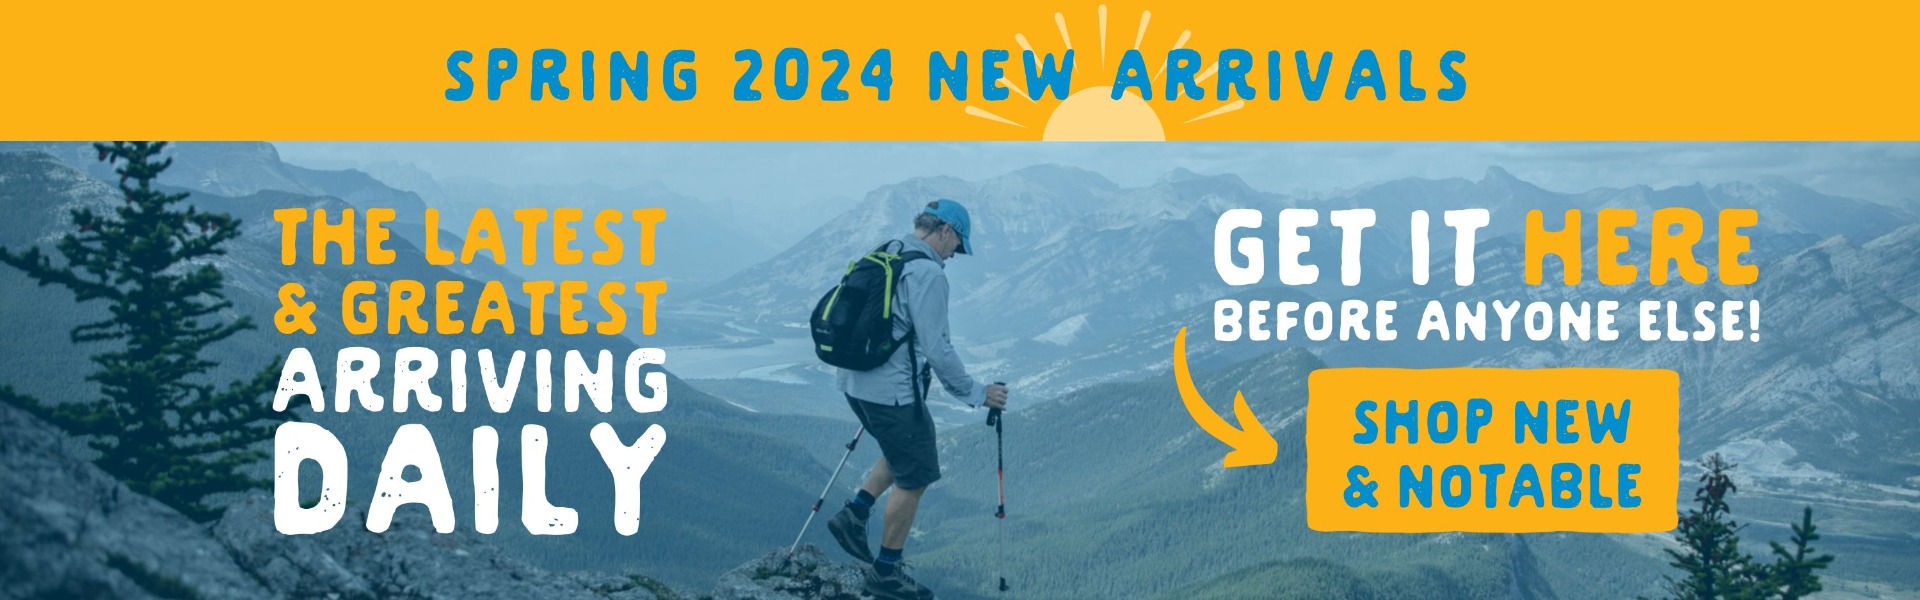 Spring 2024 New Arrivals: The latest and greatest arriving daily